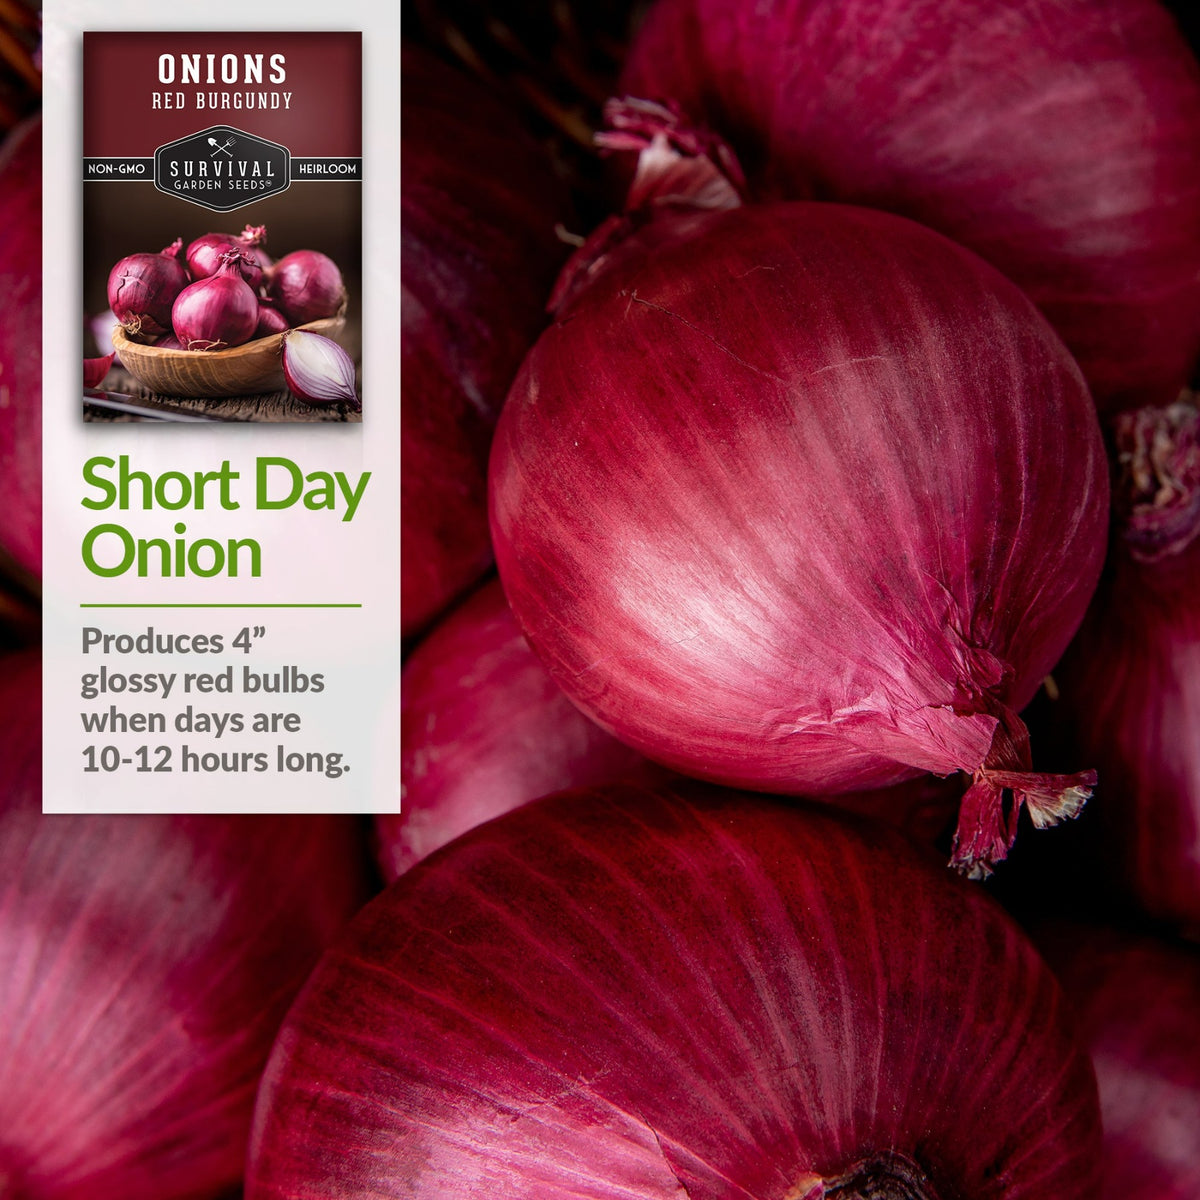 Shortday onion - produces when days are 10-12 hours long